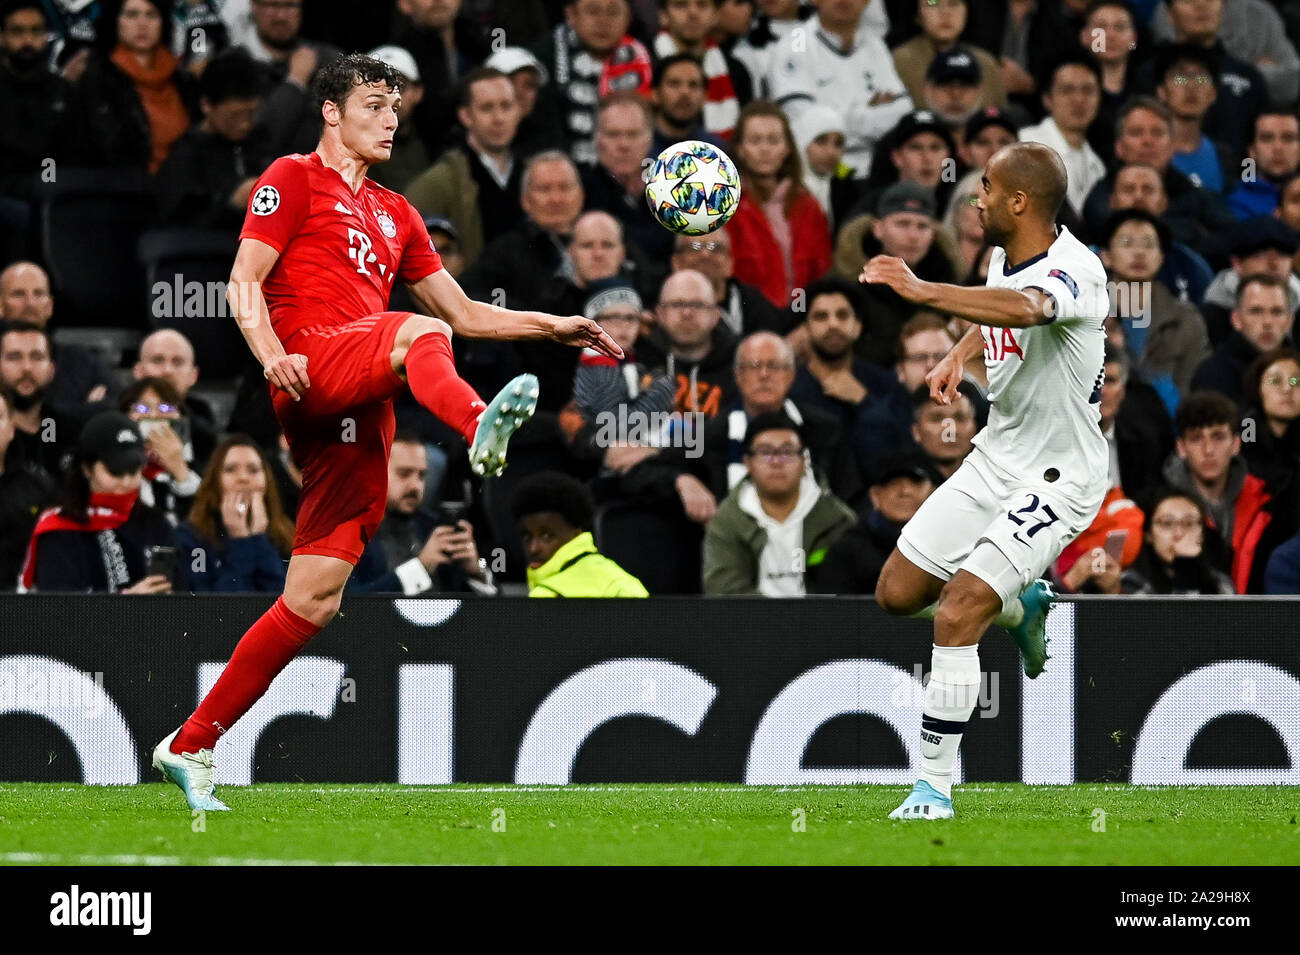 Benjamin Pavard from Bayern Munich (L) and Lucas Moura from Tottenham Hotspur (R) are seen in action during the UEFA Champions League (Group B) match between Tottenham Hotspur and Bayern Munich.(Final score; Tottenham Hotspur 2:7 Bayern Munich) Stock Photo